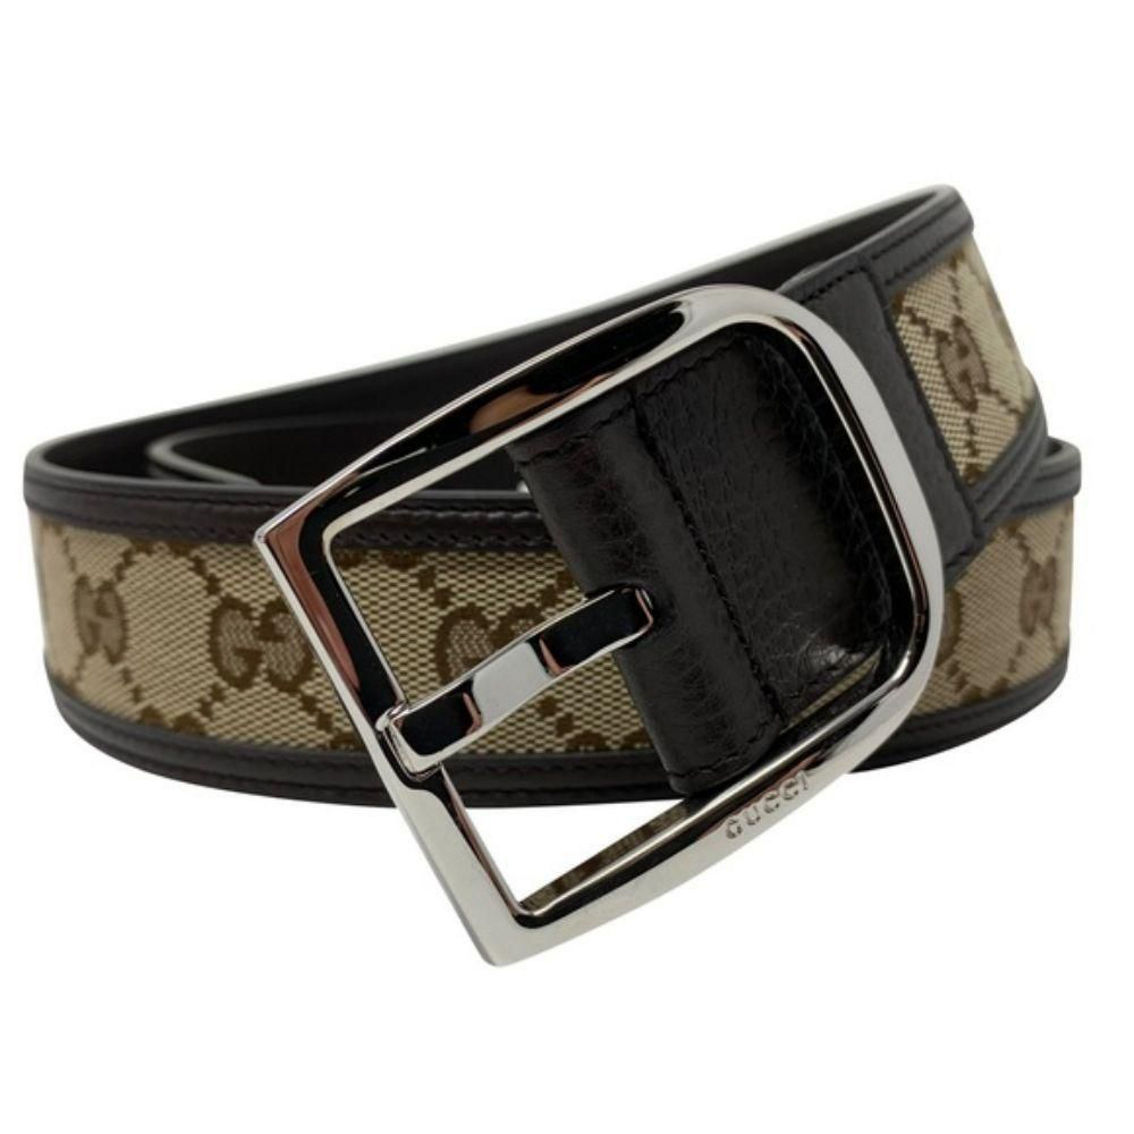 Gucci GG Brown and Beige Canvas Leather Trim Belt Size 36/90 - Image 3 of 5